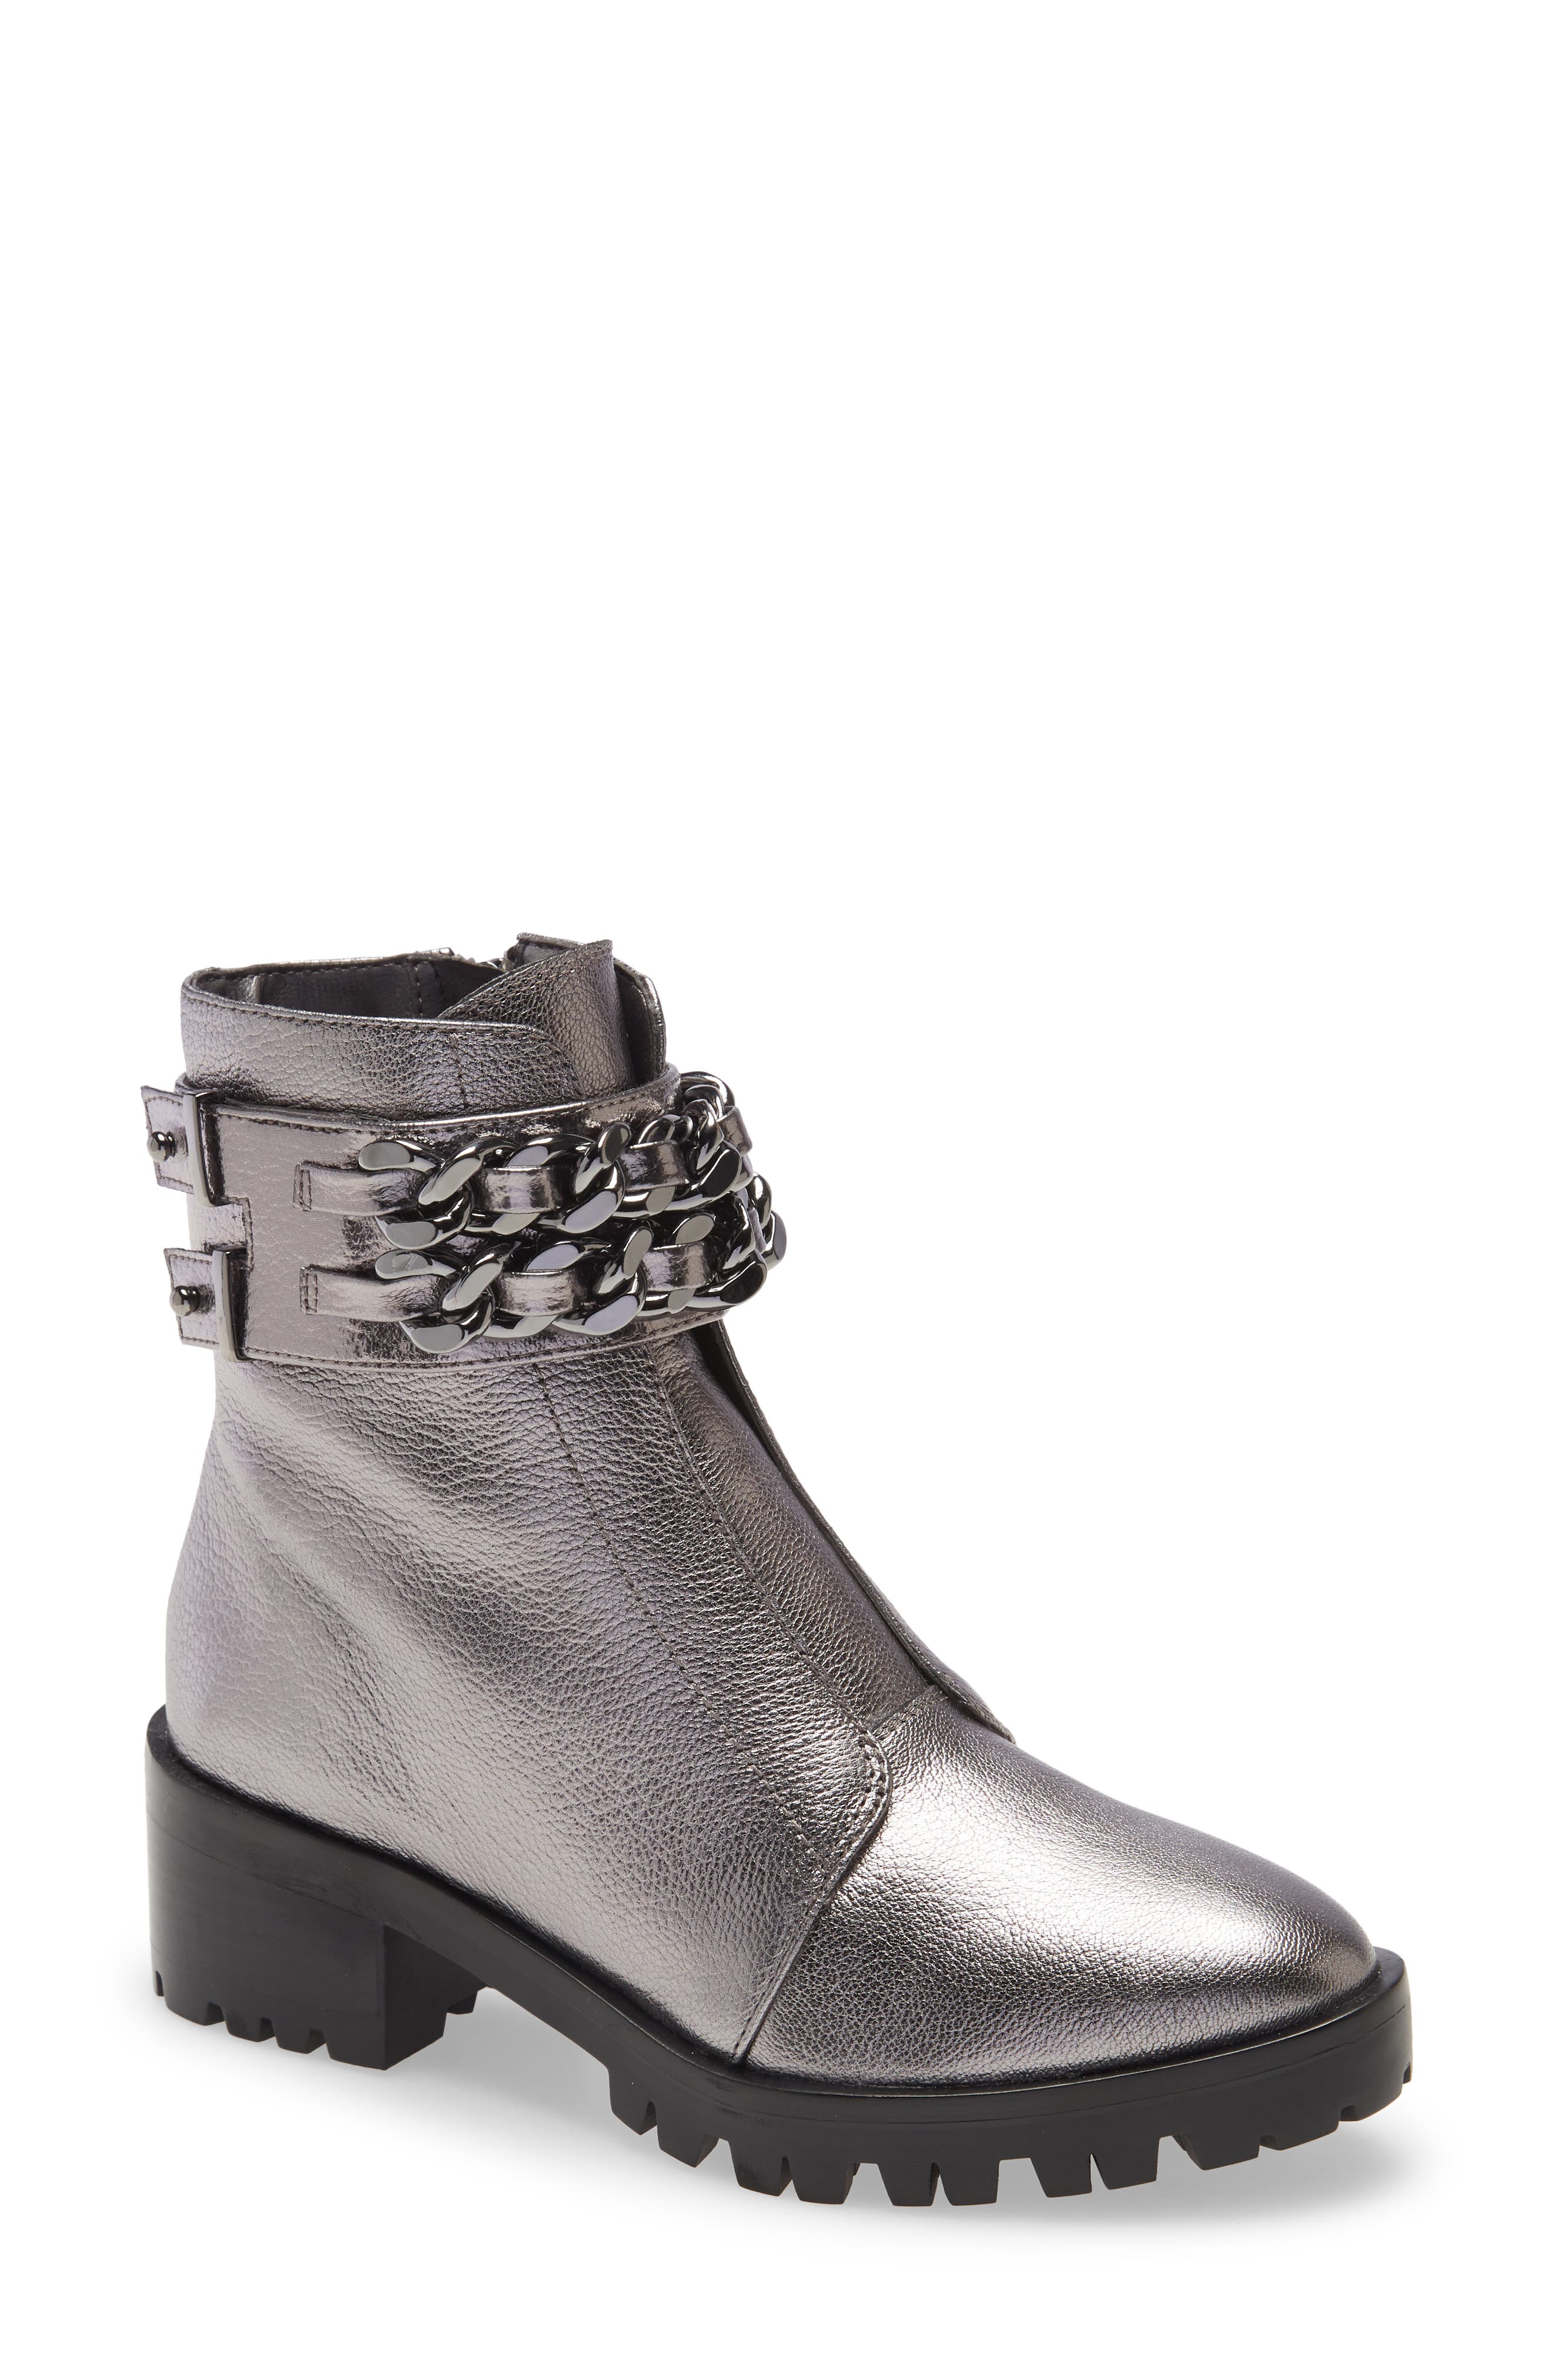 karl lagerfeld silver shoes